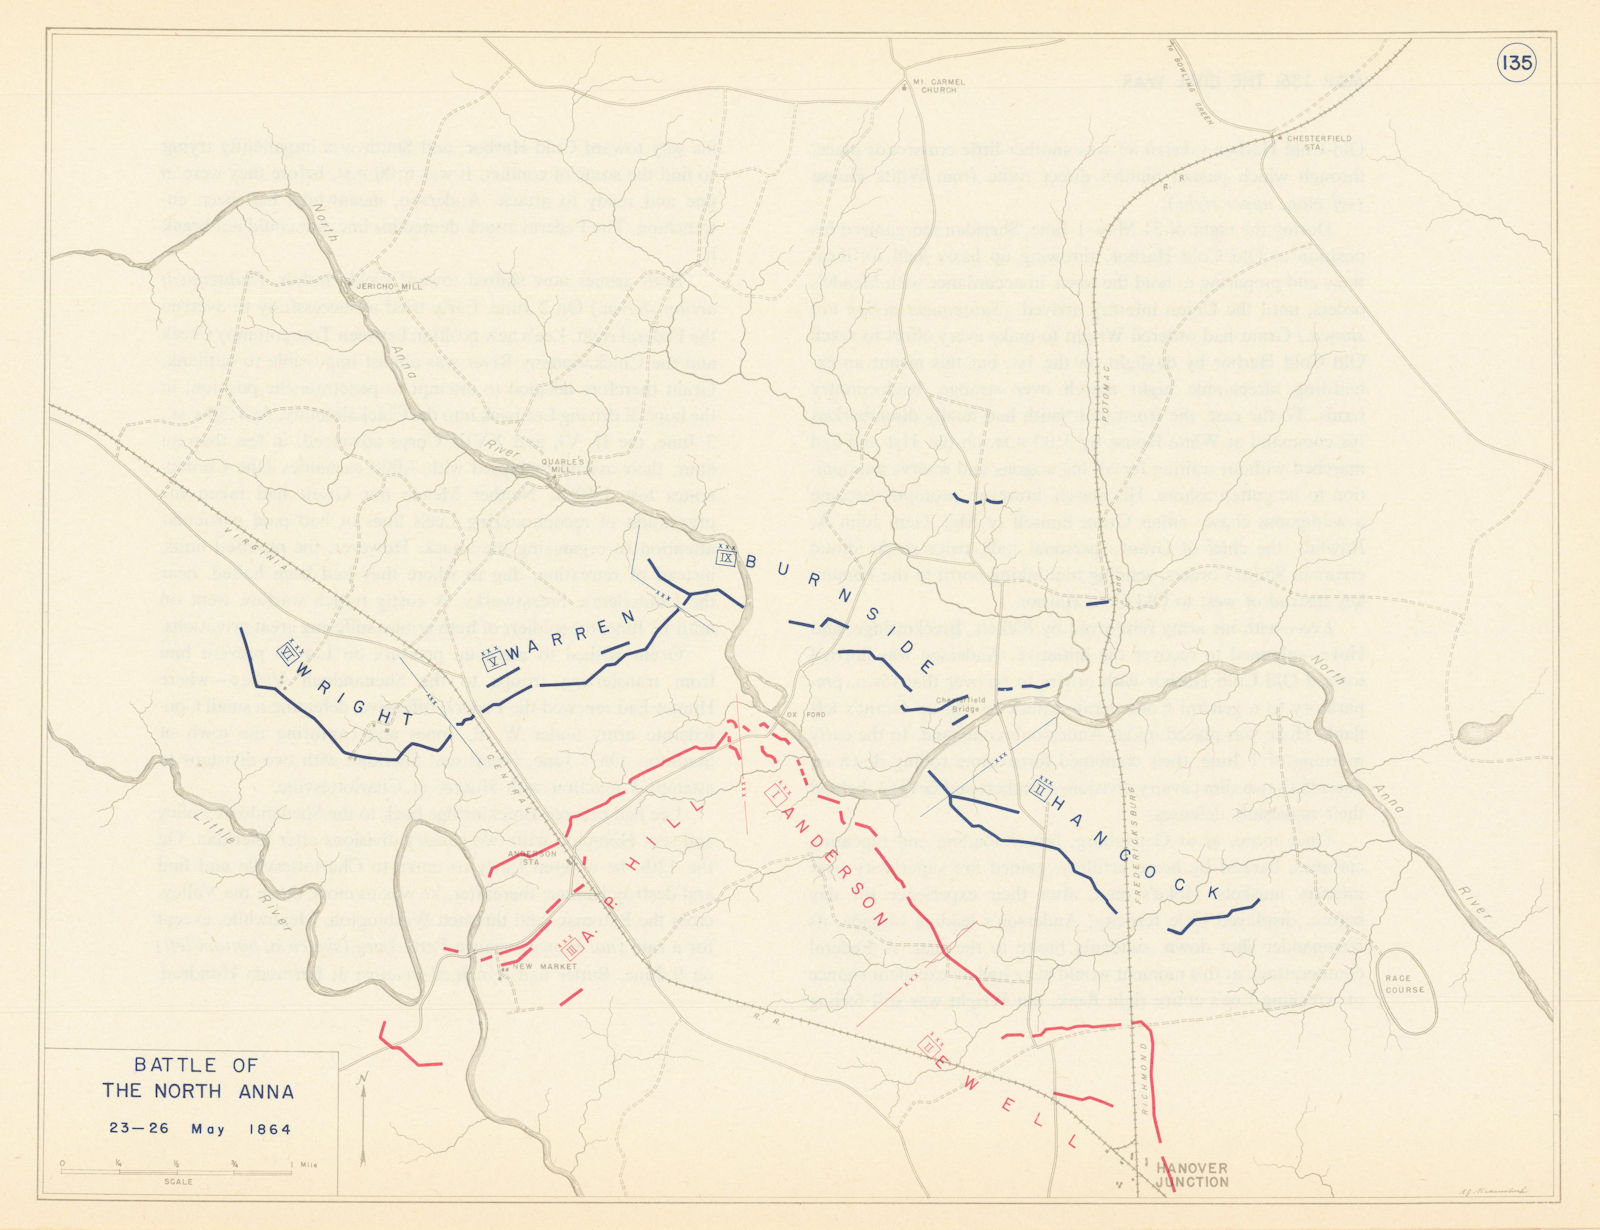 American Civil War. 23-26 May 1864 Battle of The North Anna. Virginia 1959 map